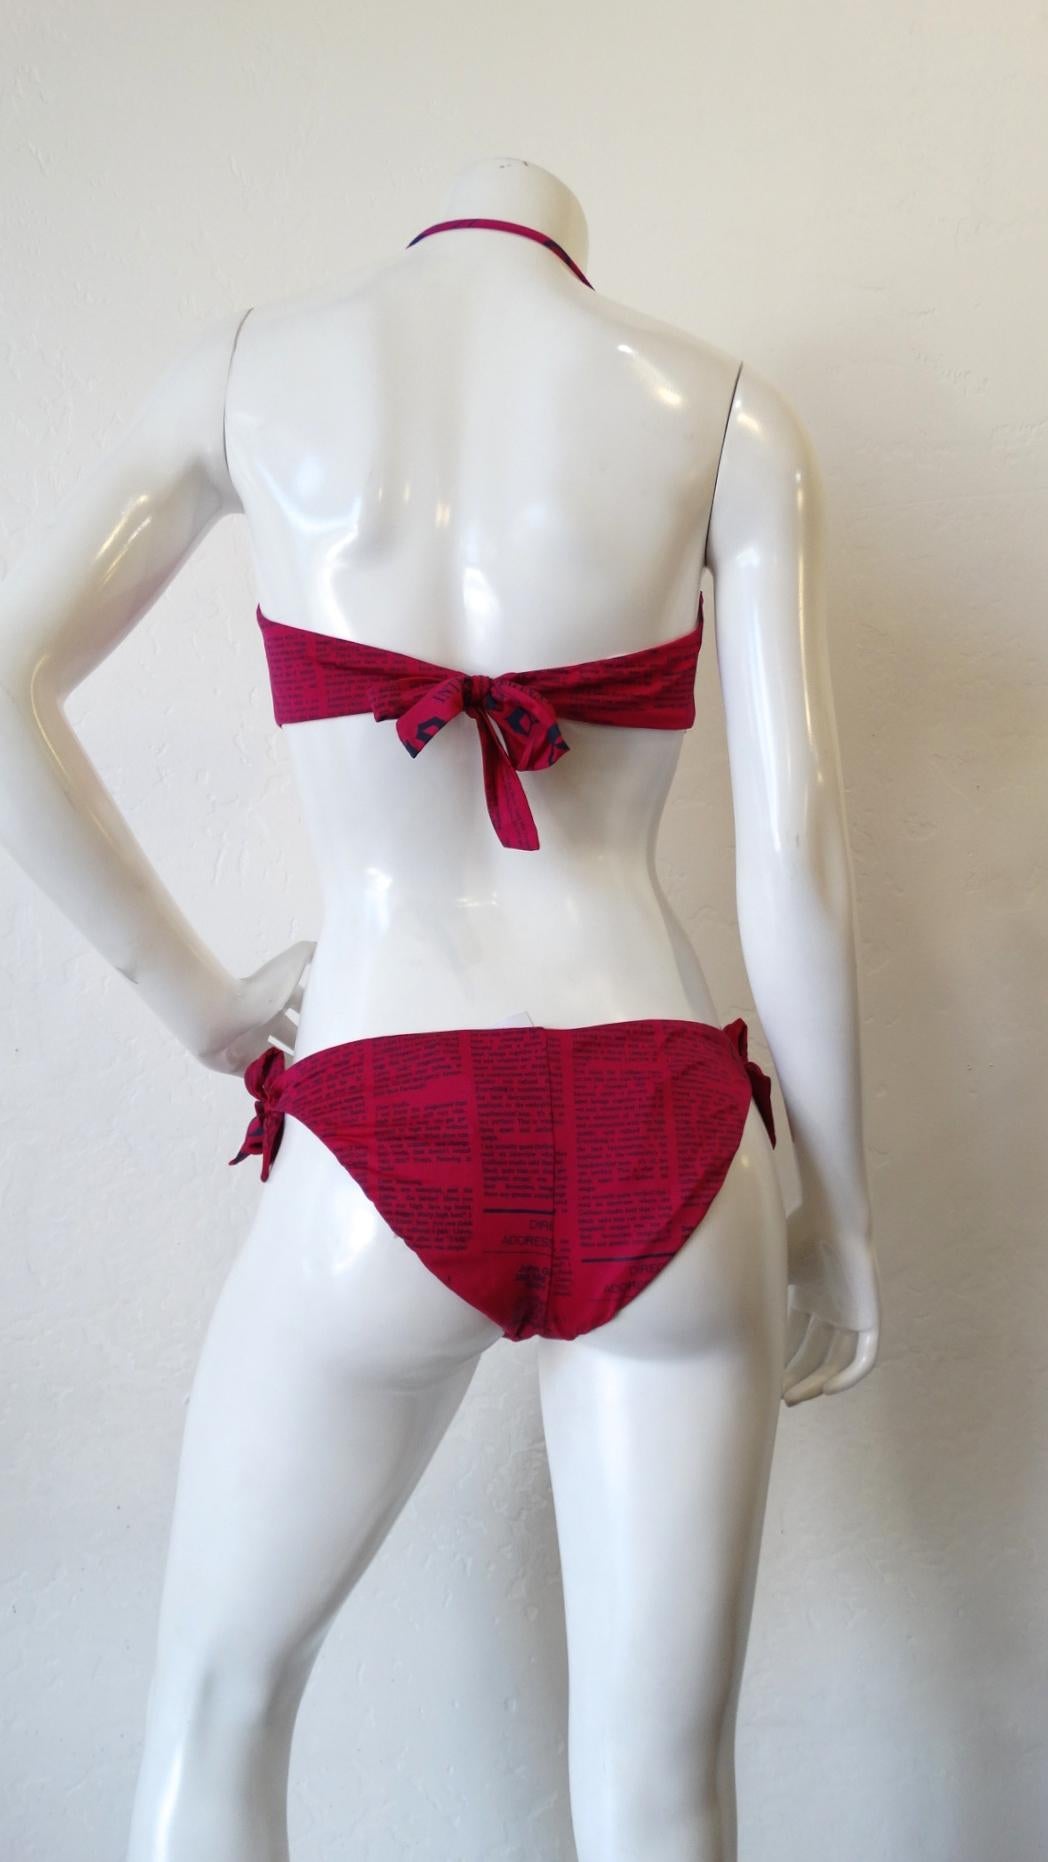 The Most Adorable Swim Suit For Your Next Vacation! Circa 2000s, reminiscent of his Dior Daily print, this fuchsia Galliano bikini once again features the iconic Gazette newspaper print. Halter top has removable halter strap, transforming the top